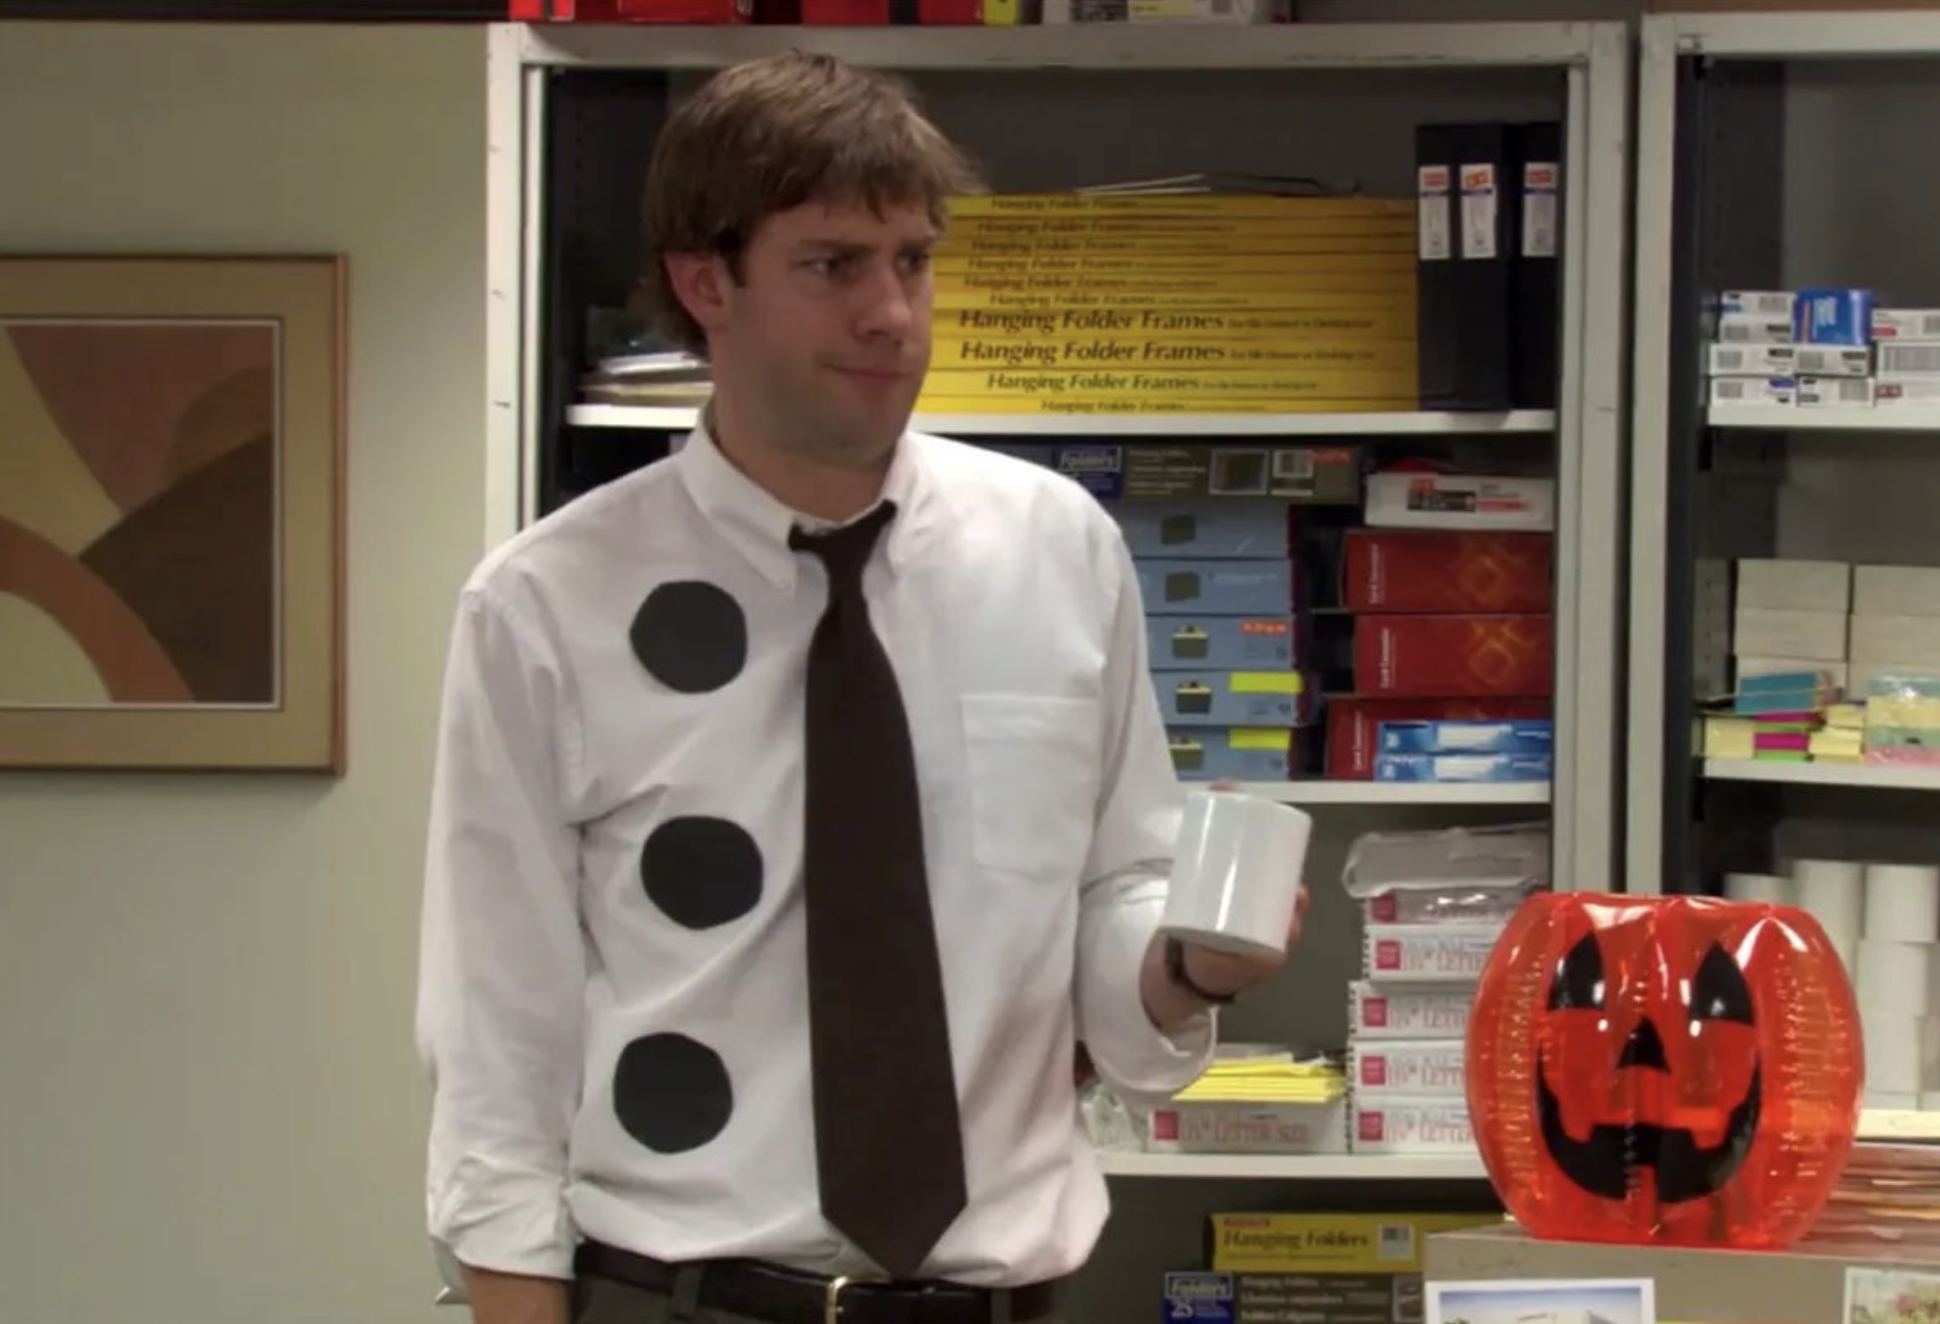 Jim wears three black circles on his white shirt to look like a piece of paper